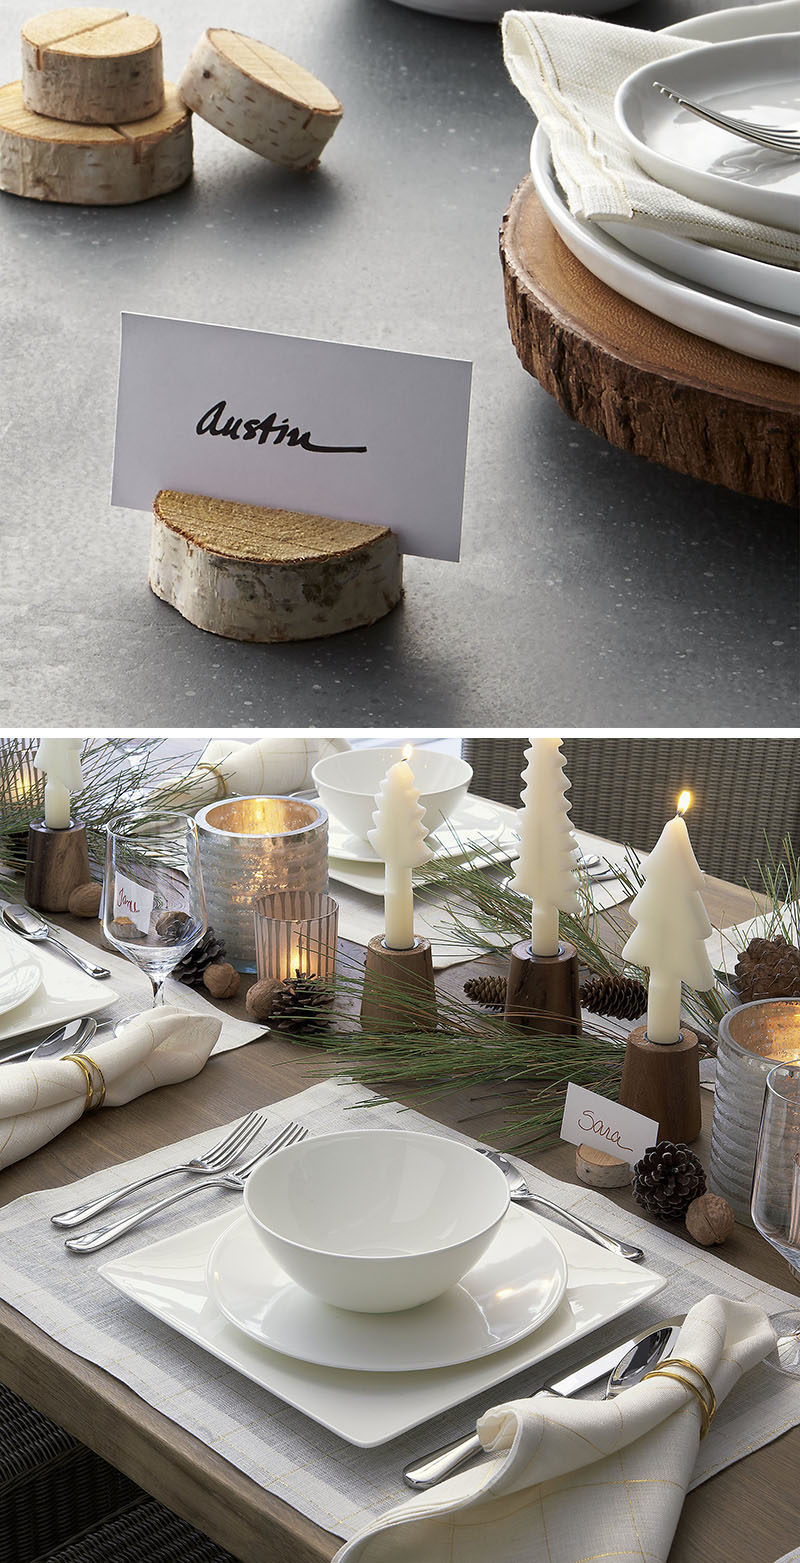 15 Inspirational Ideas For Creating A Modern Christmas Table Full Of Natural Elements // Thinly sliced wood stumps add a simplistic natural touch to the table and are perfect for clearly displaying name cards.